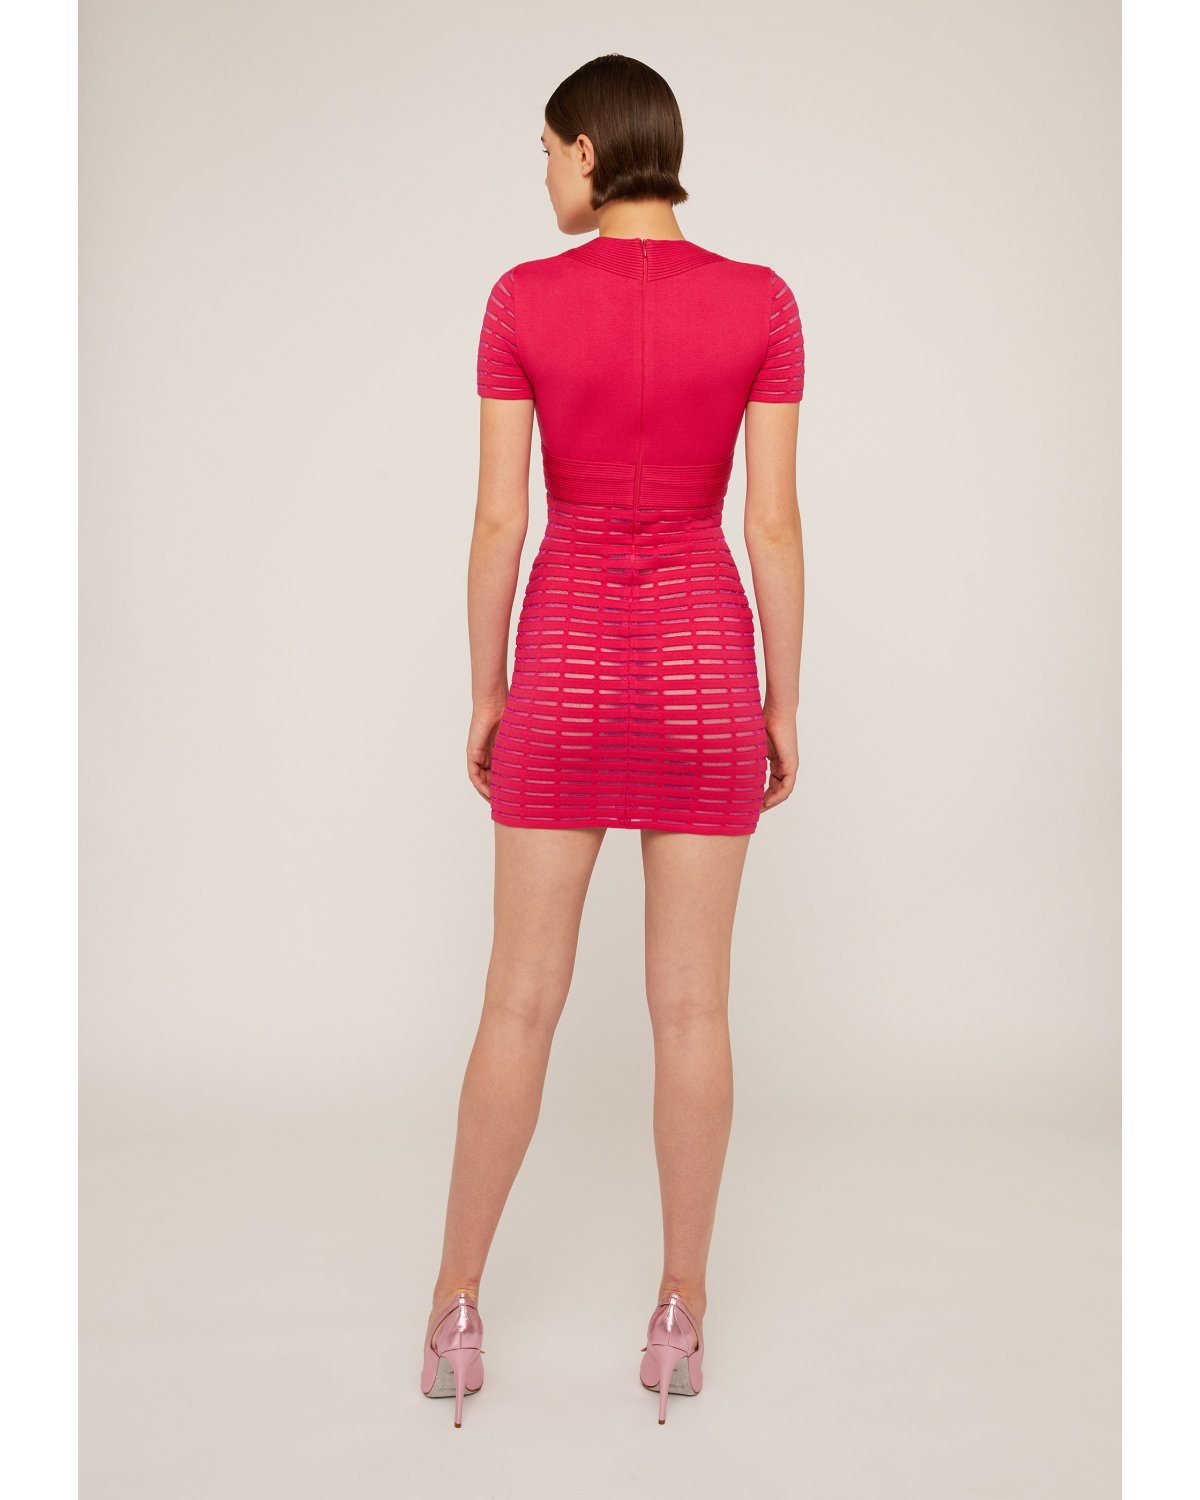 Iconic pink dress with crossover bodice | Spring Summer 2023 Collection, 73_74, Cruise 2023 Collection, Mid season sale -30%, Summer Sale | Genny